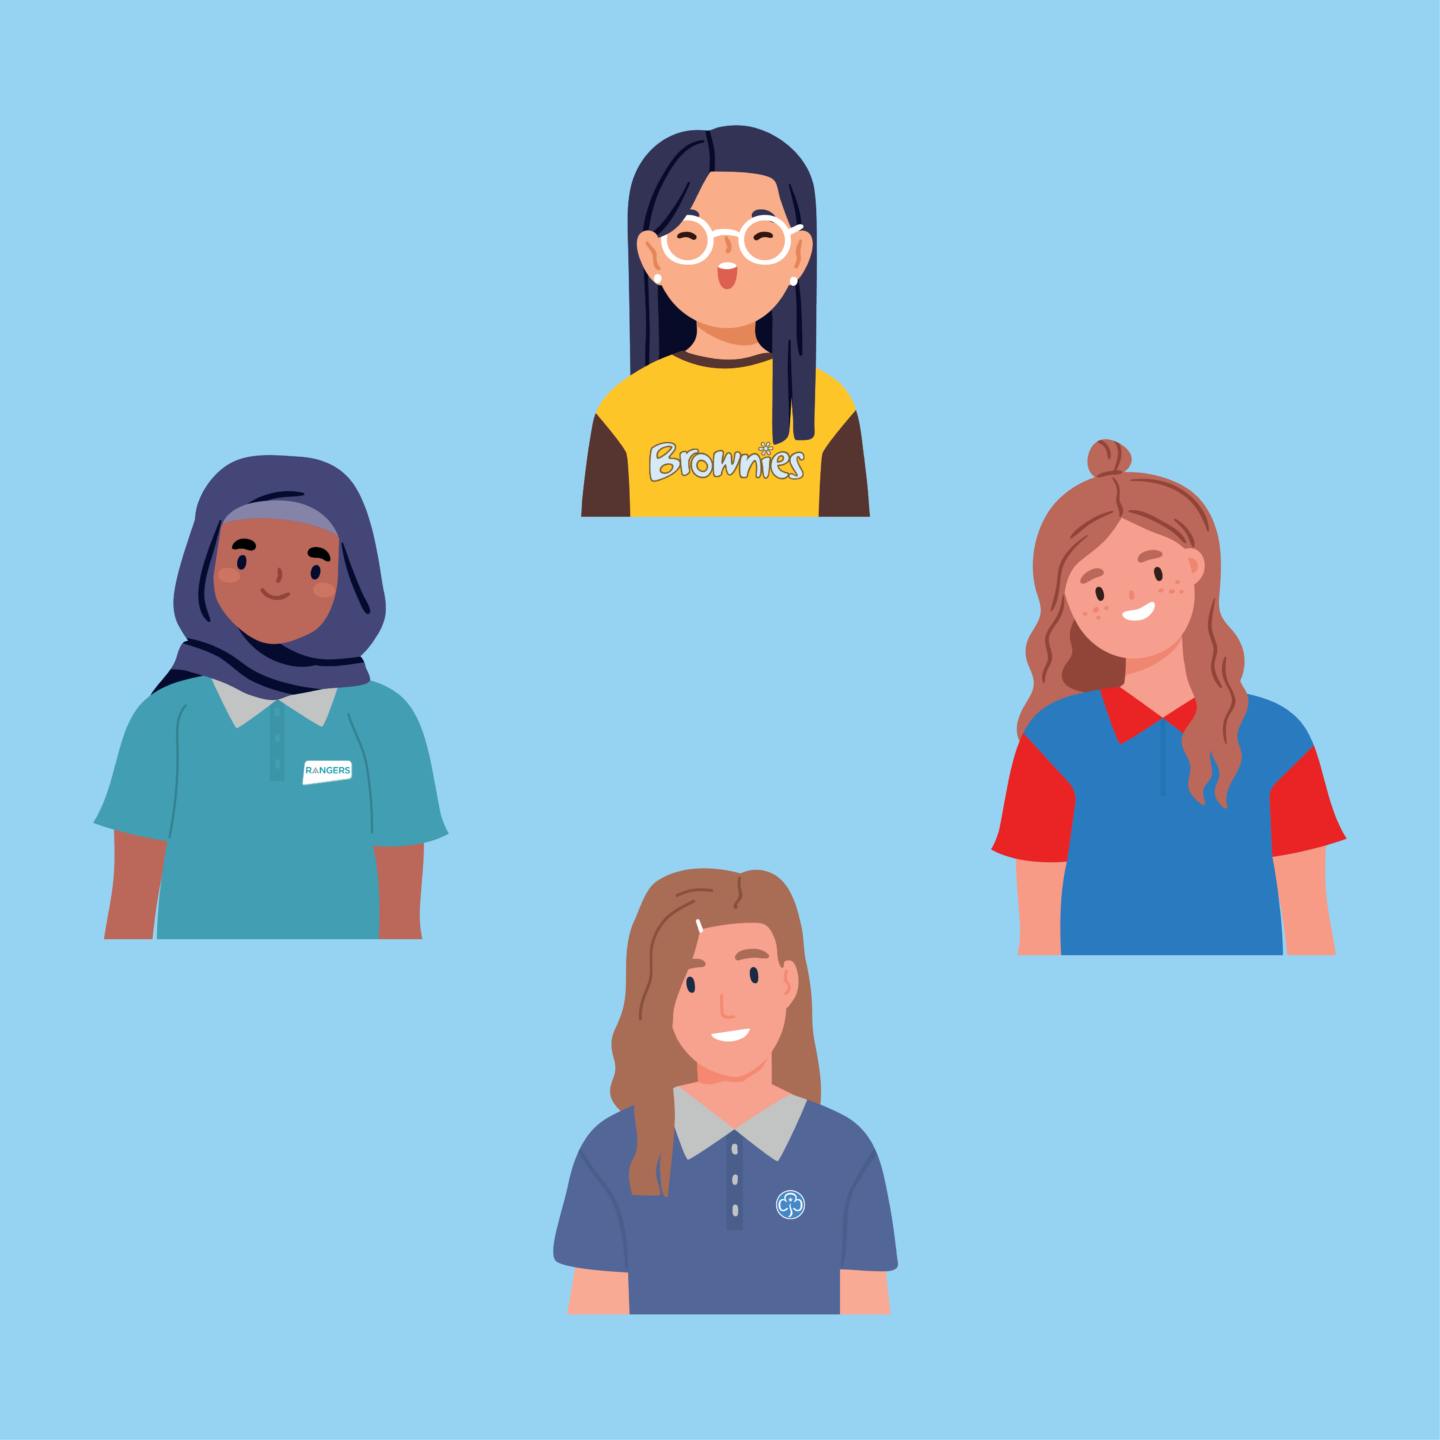 graphic avatars of young members who might be involved in peer education